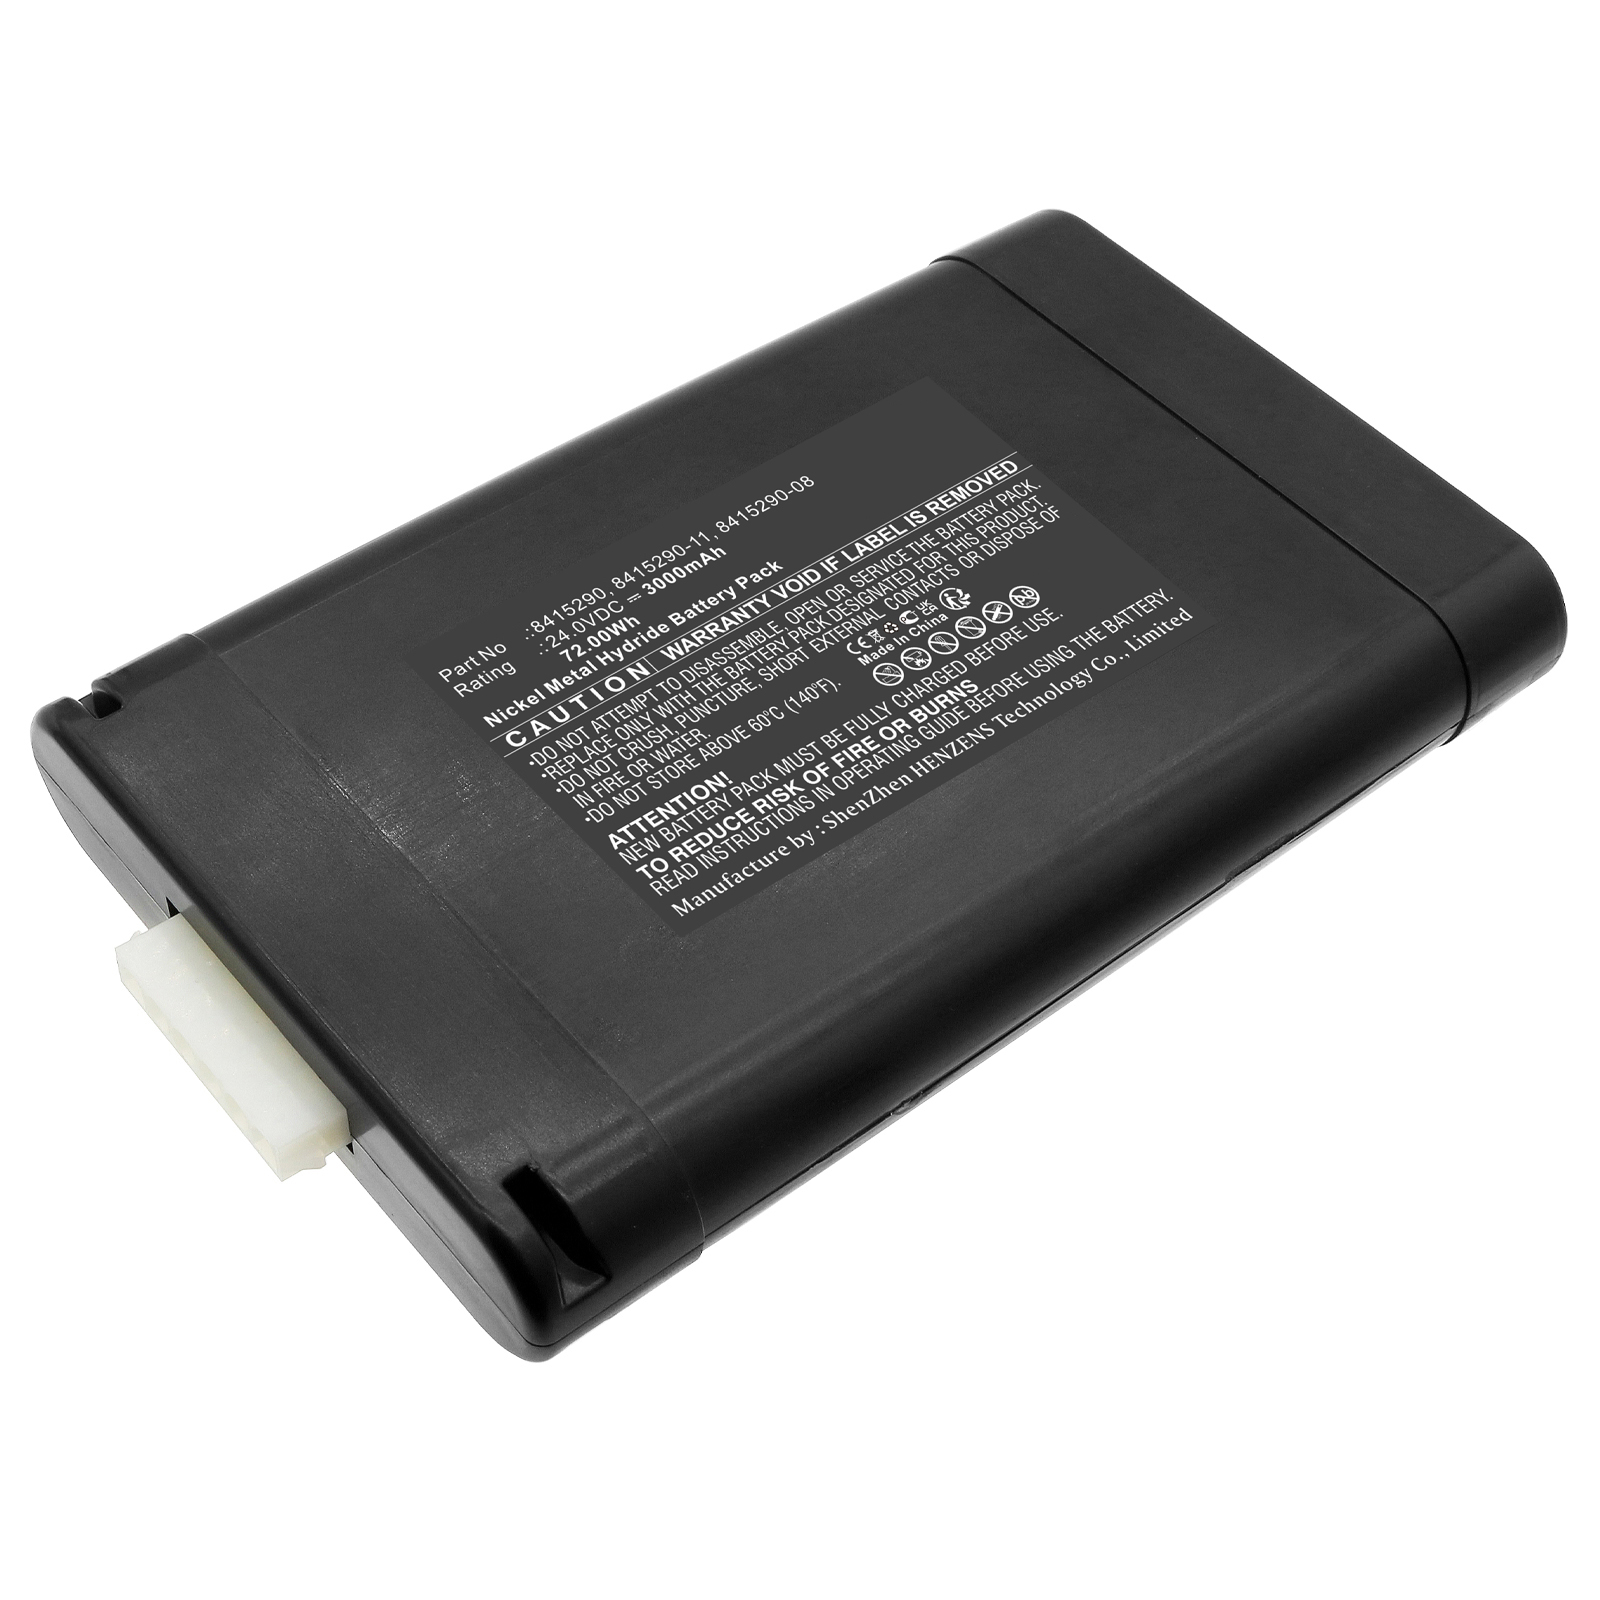 Synergy Digital Medical Battery, Compatible with Drager 8415290 Medical Battery (Ni-MH, 24V, 3000mAh)